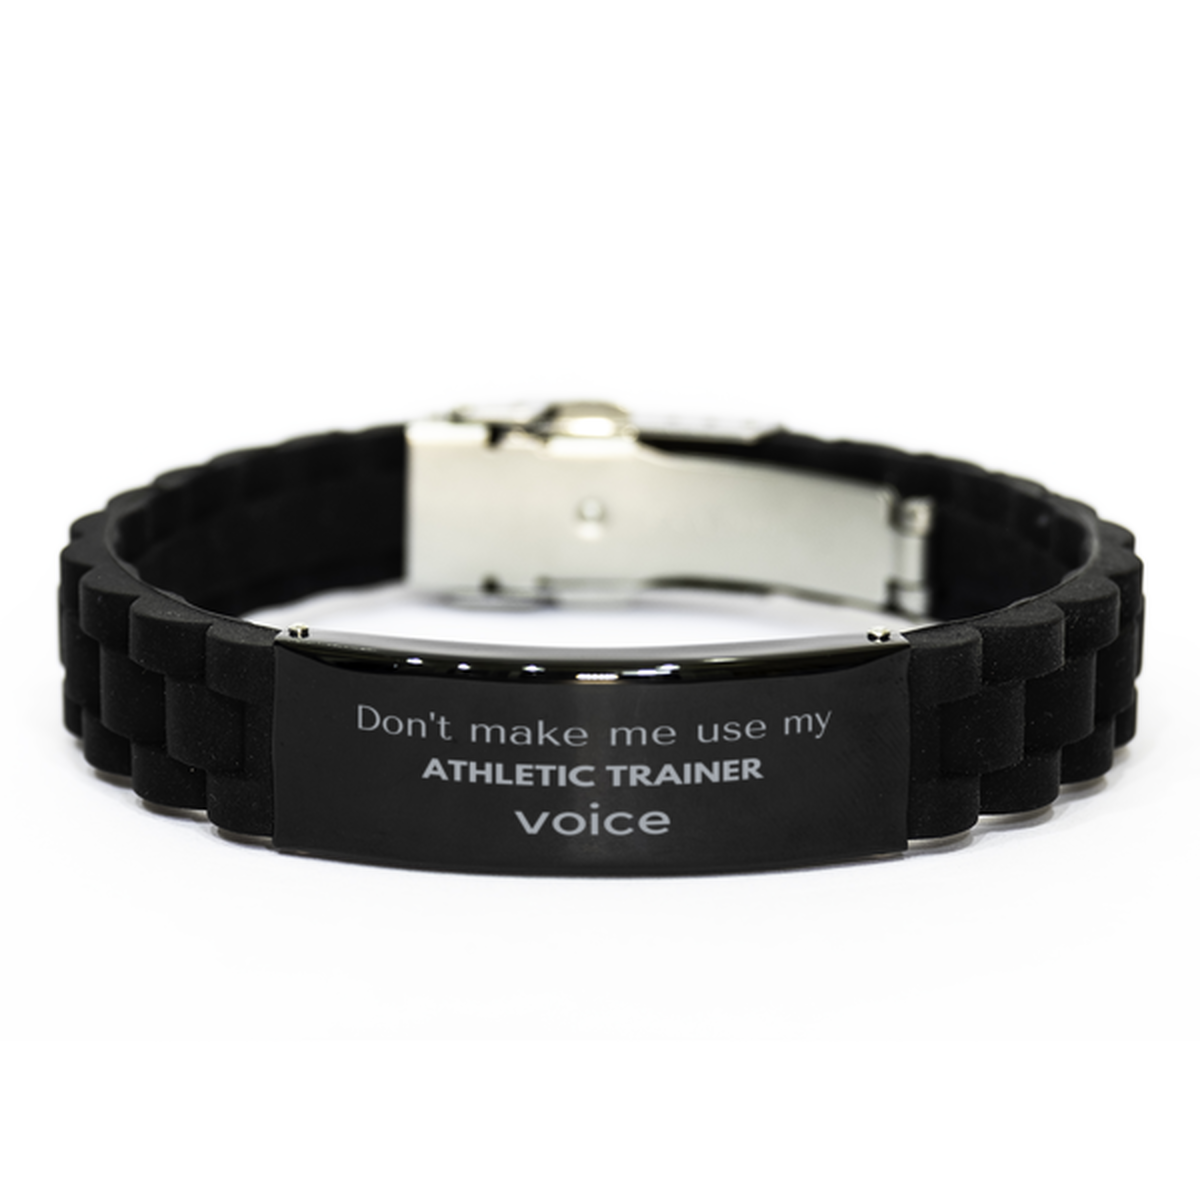 Don't make me use my Athletic Trainer voice, Sarcasm Athletic Trainer Gifts, Christmas Athletic Trainer Black Glidelock Clasp Bracelet Birthday Unique Gifts For Athletic Trainer Coworkers, Men, Women, Colleague, Friends